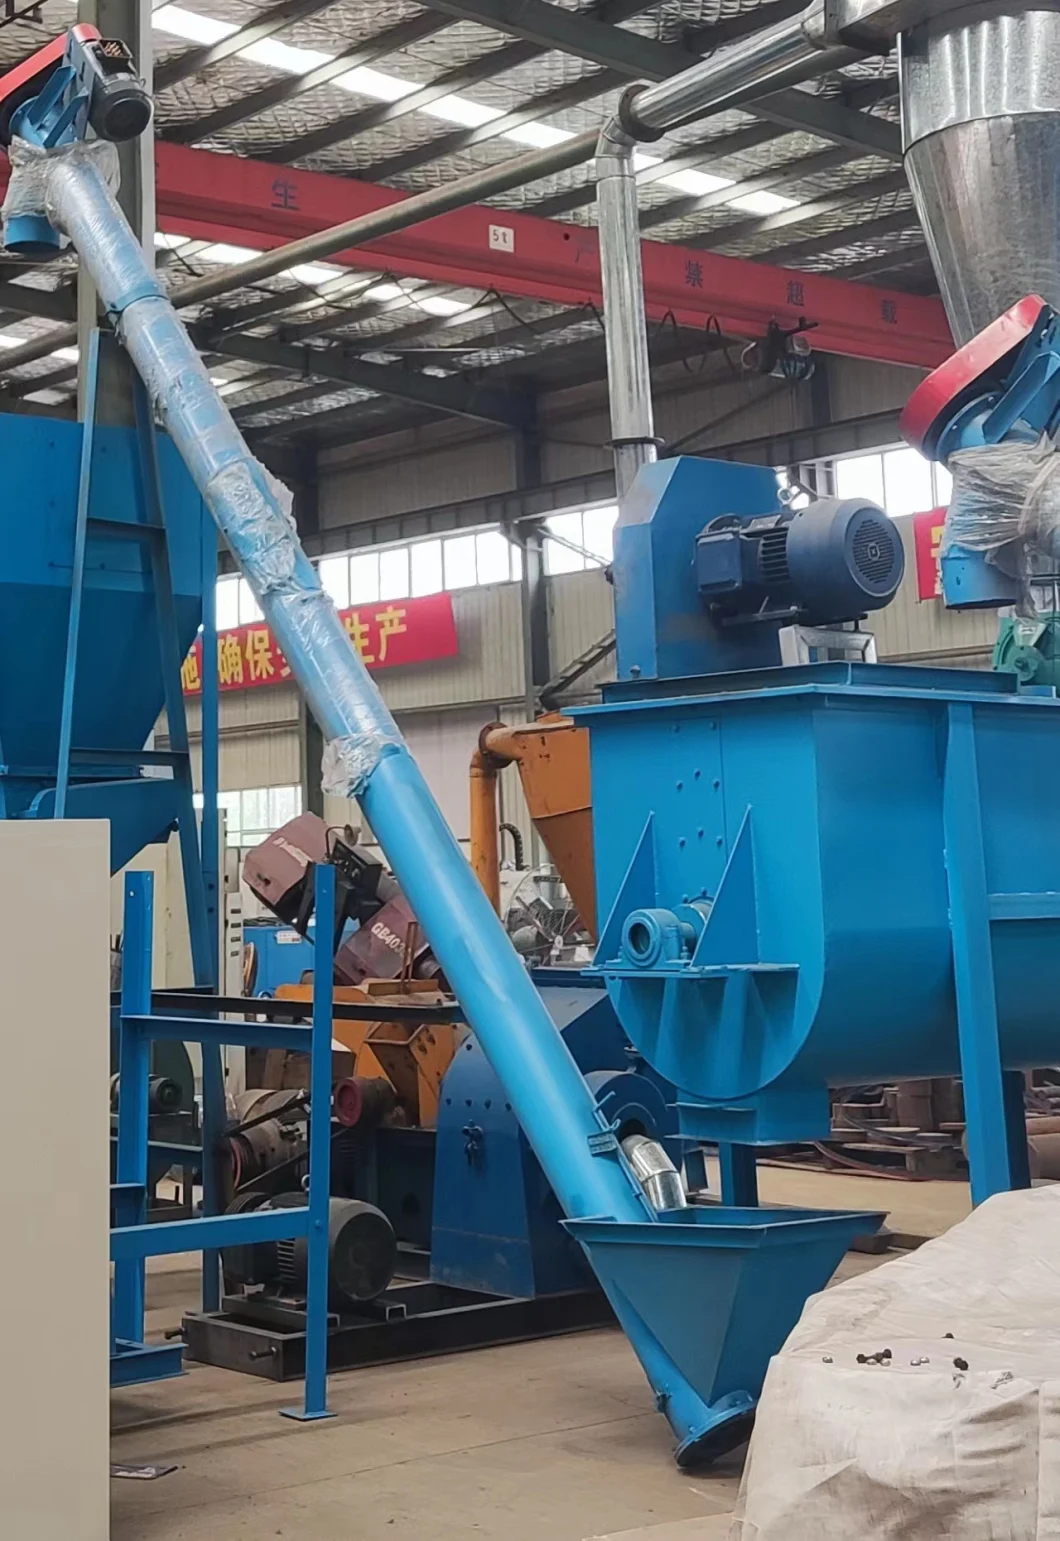 CE Approve Full Wood Pellet Machine Biomass Straw Grass Alfalfa Pellet Making Machinery Forest Log Branches Chips Sawdust Fuel Pellet Production Mill Line